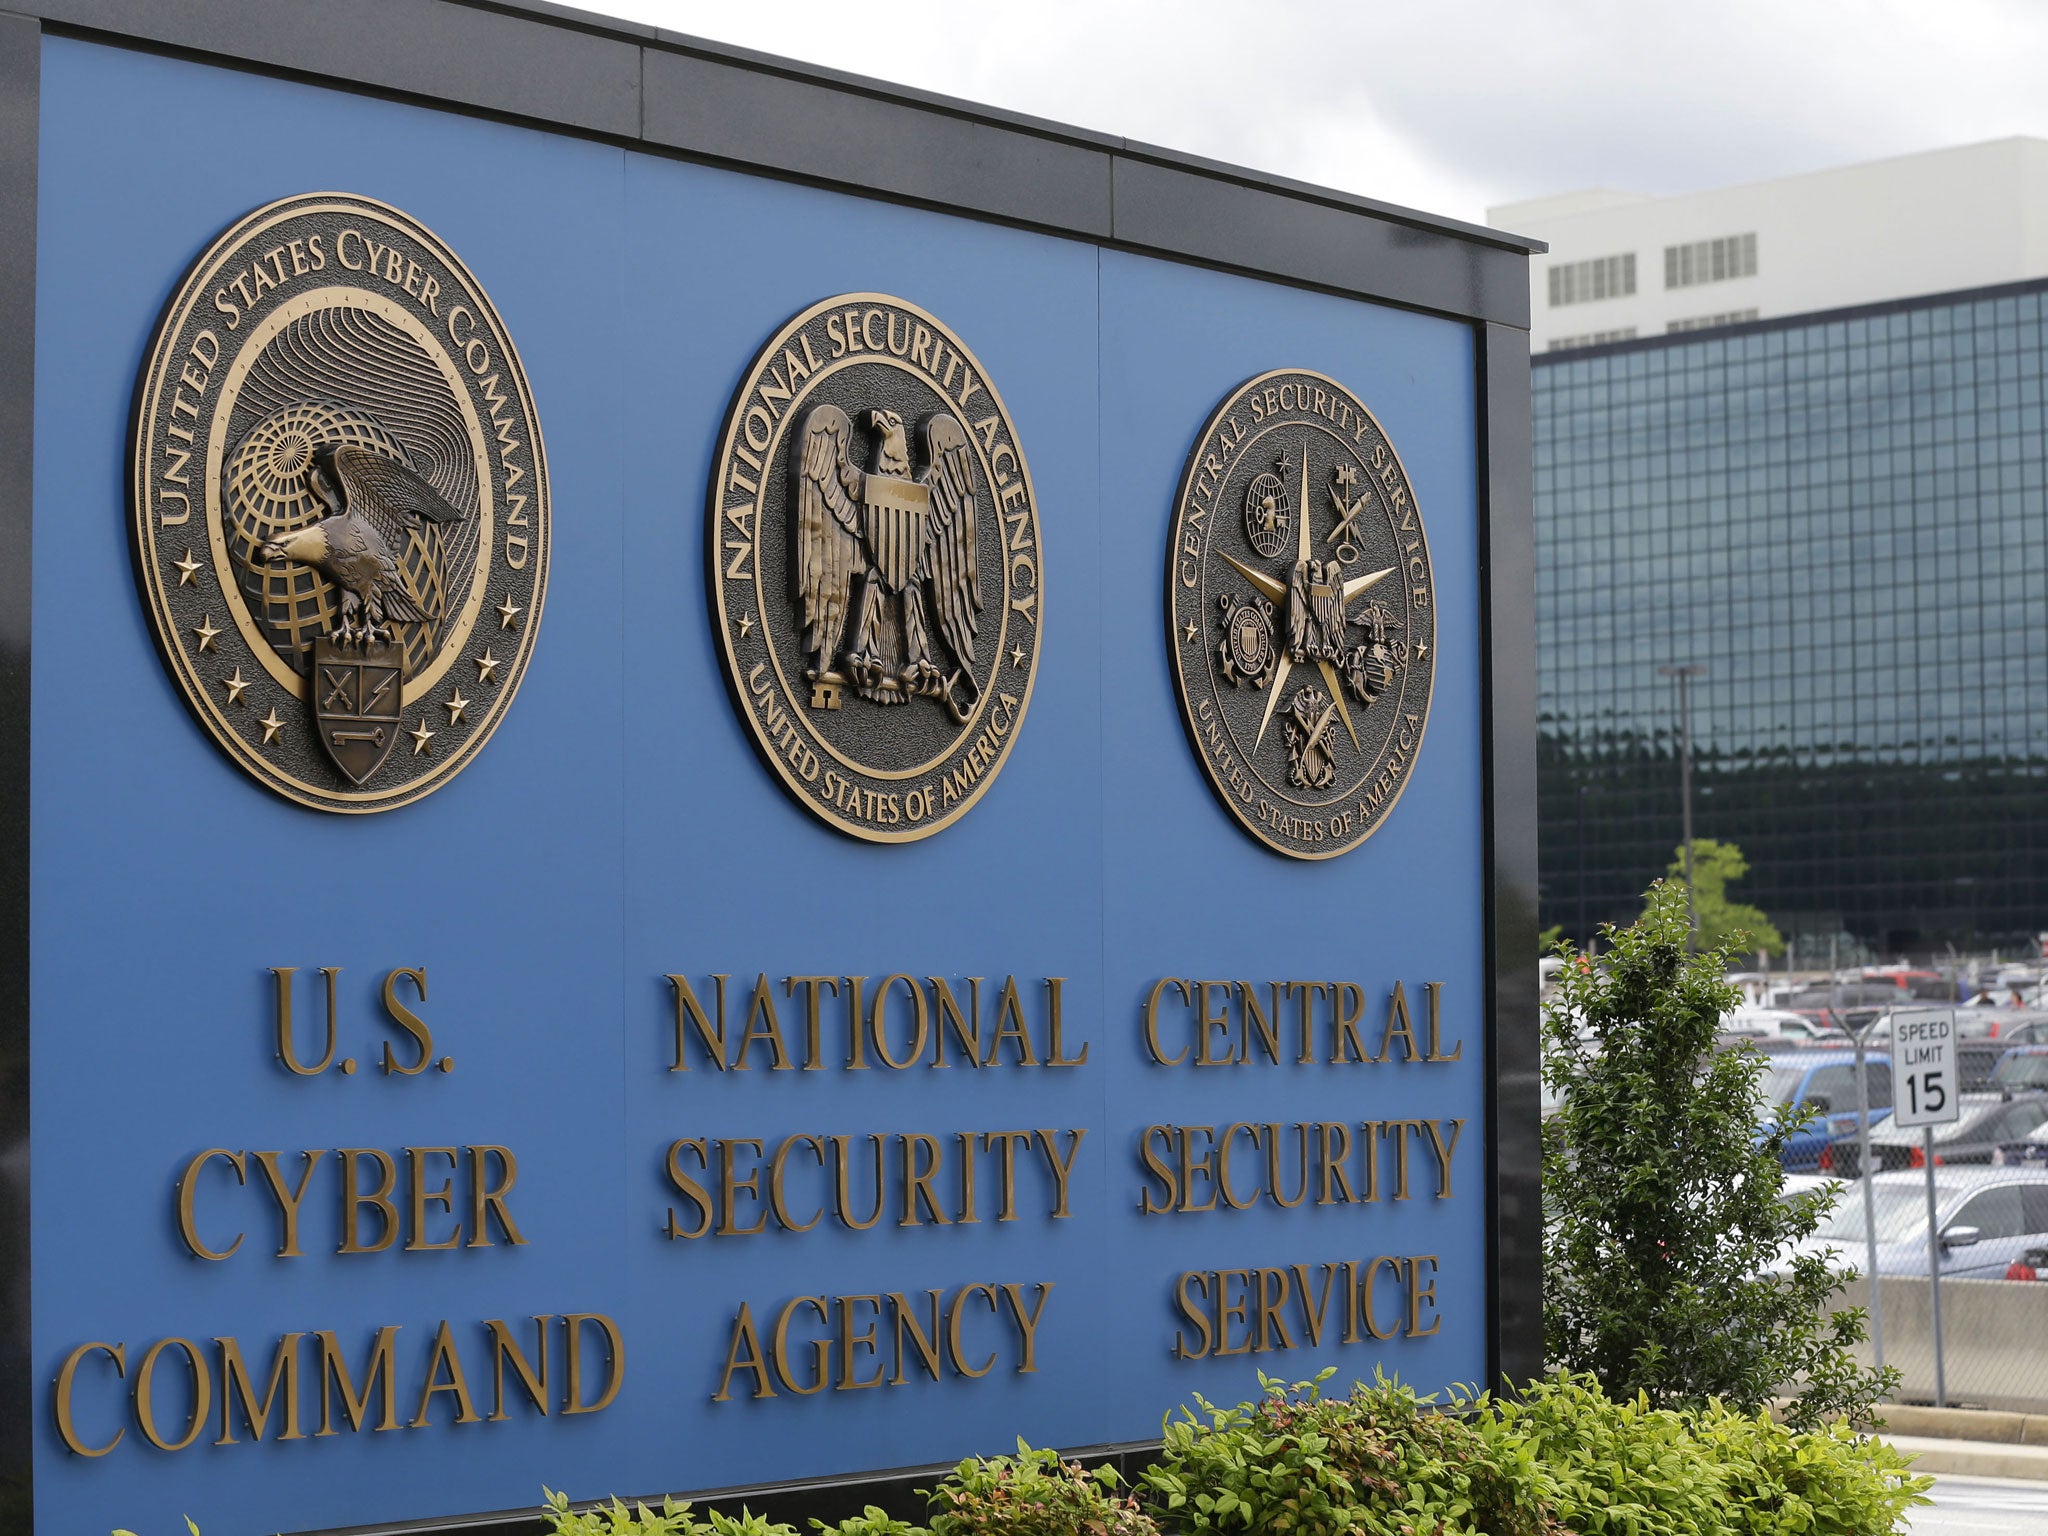 The NSA's offices in Fort Meade, Maryland